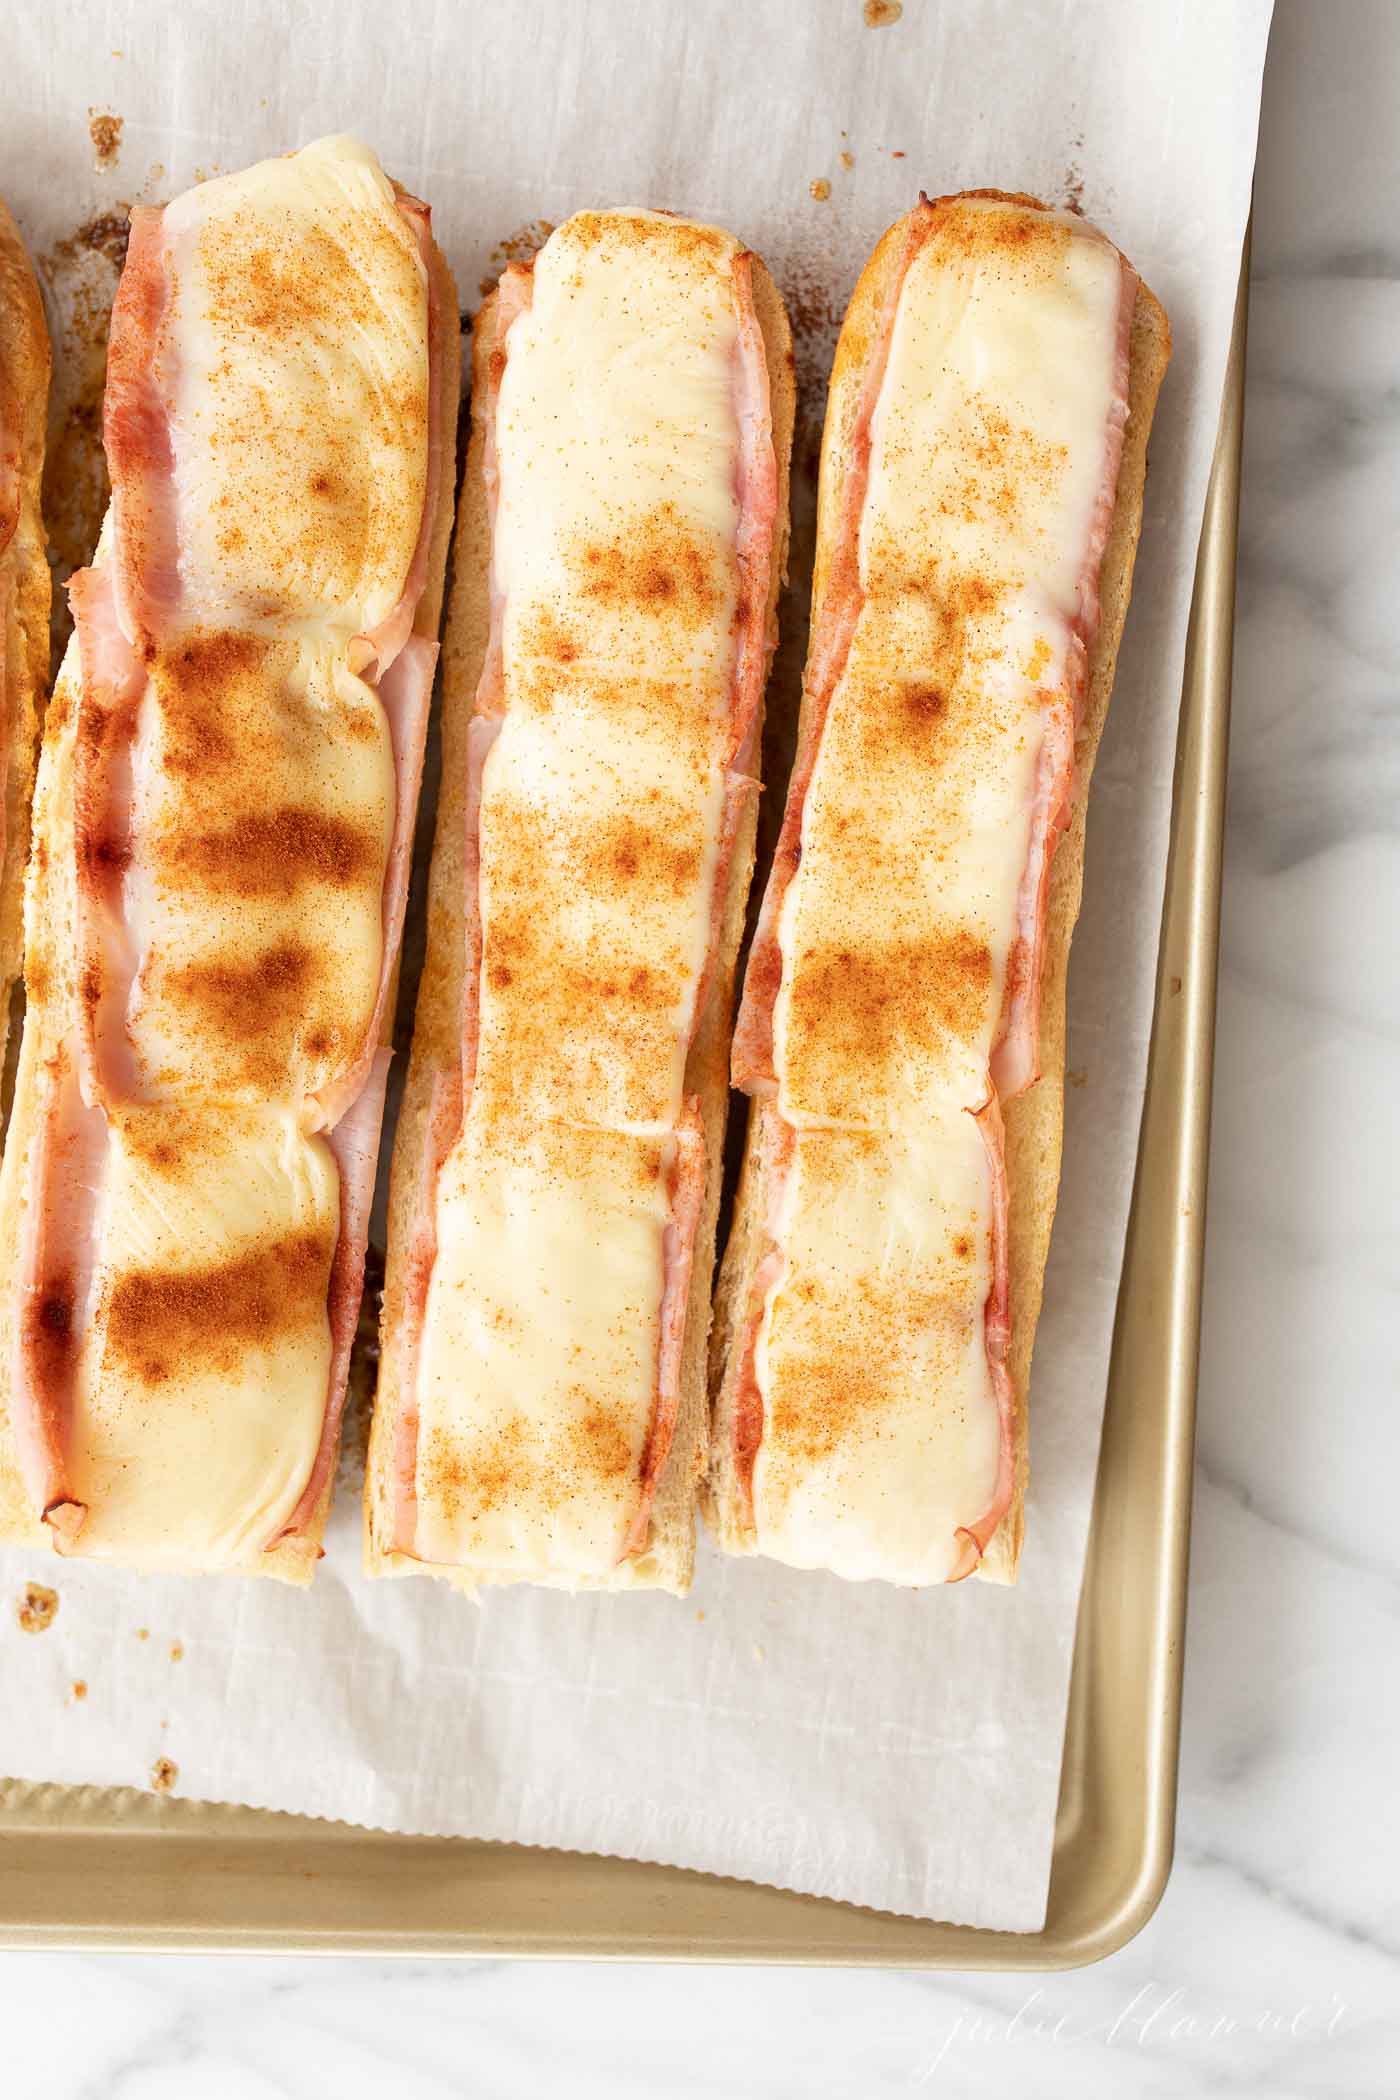 Gerber sandwiches on a parchment lined baking sheet.